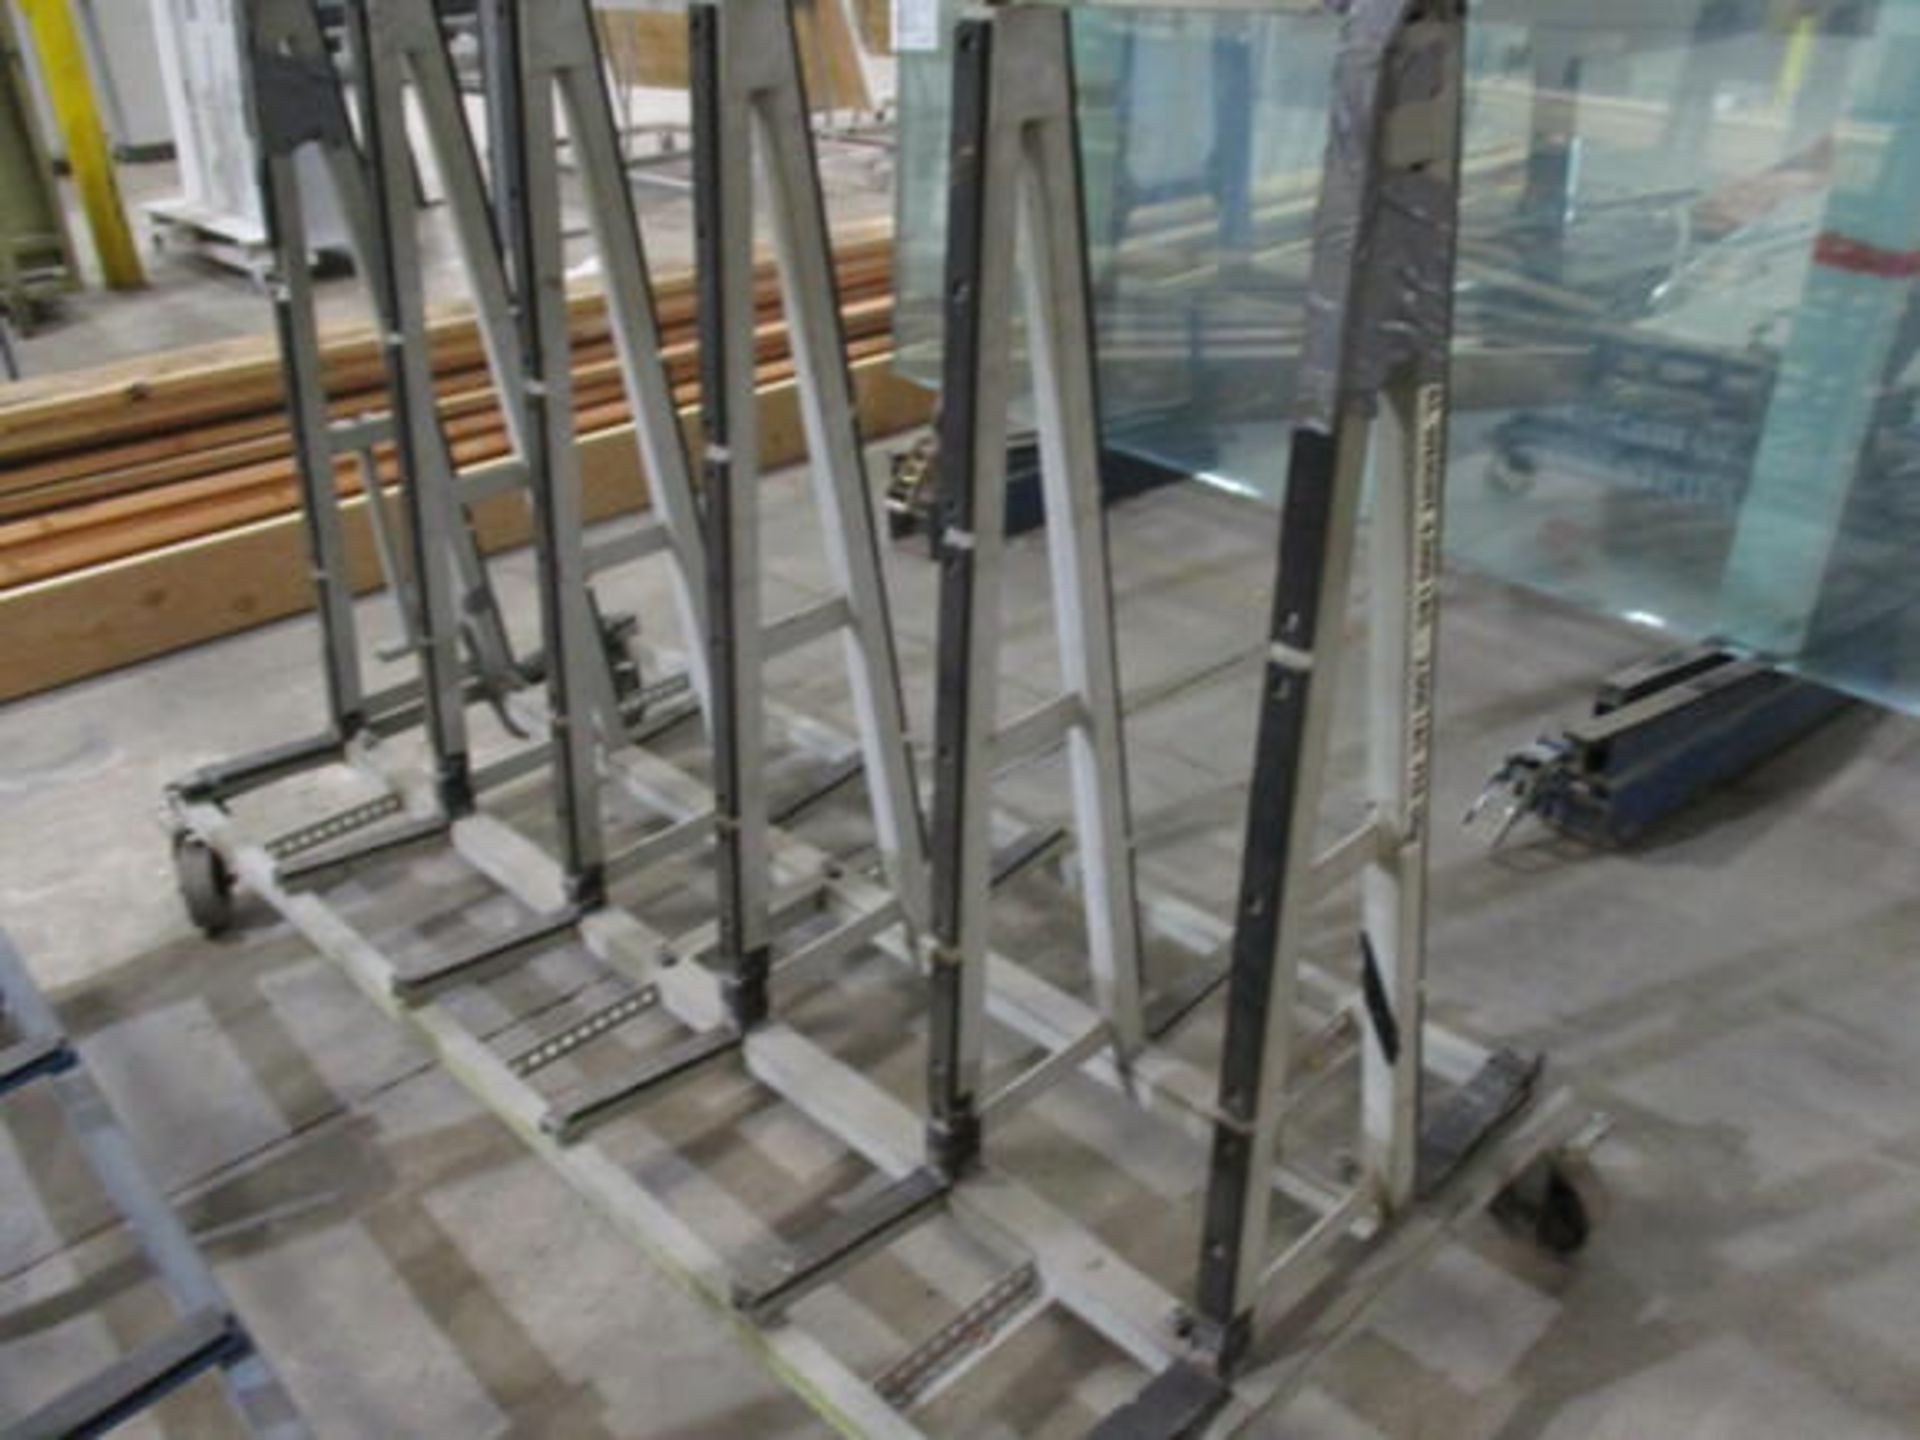 PORTABLE METAL DOUBLE SIDED GLASS RACK, APPROX 4' X 9' 5' - Image 2 of 2